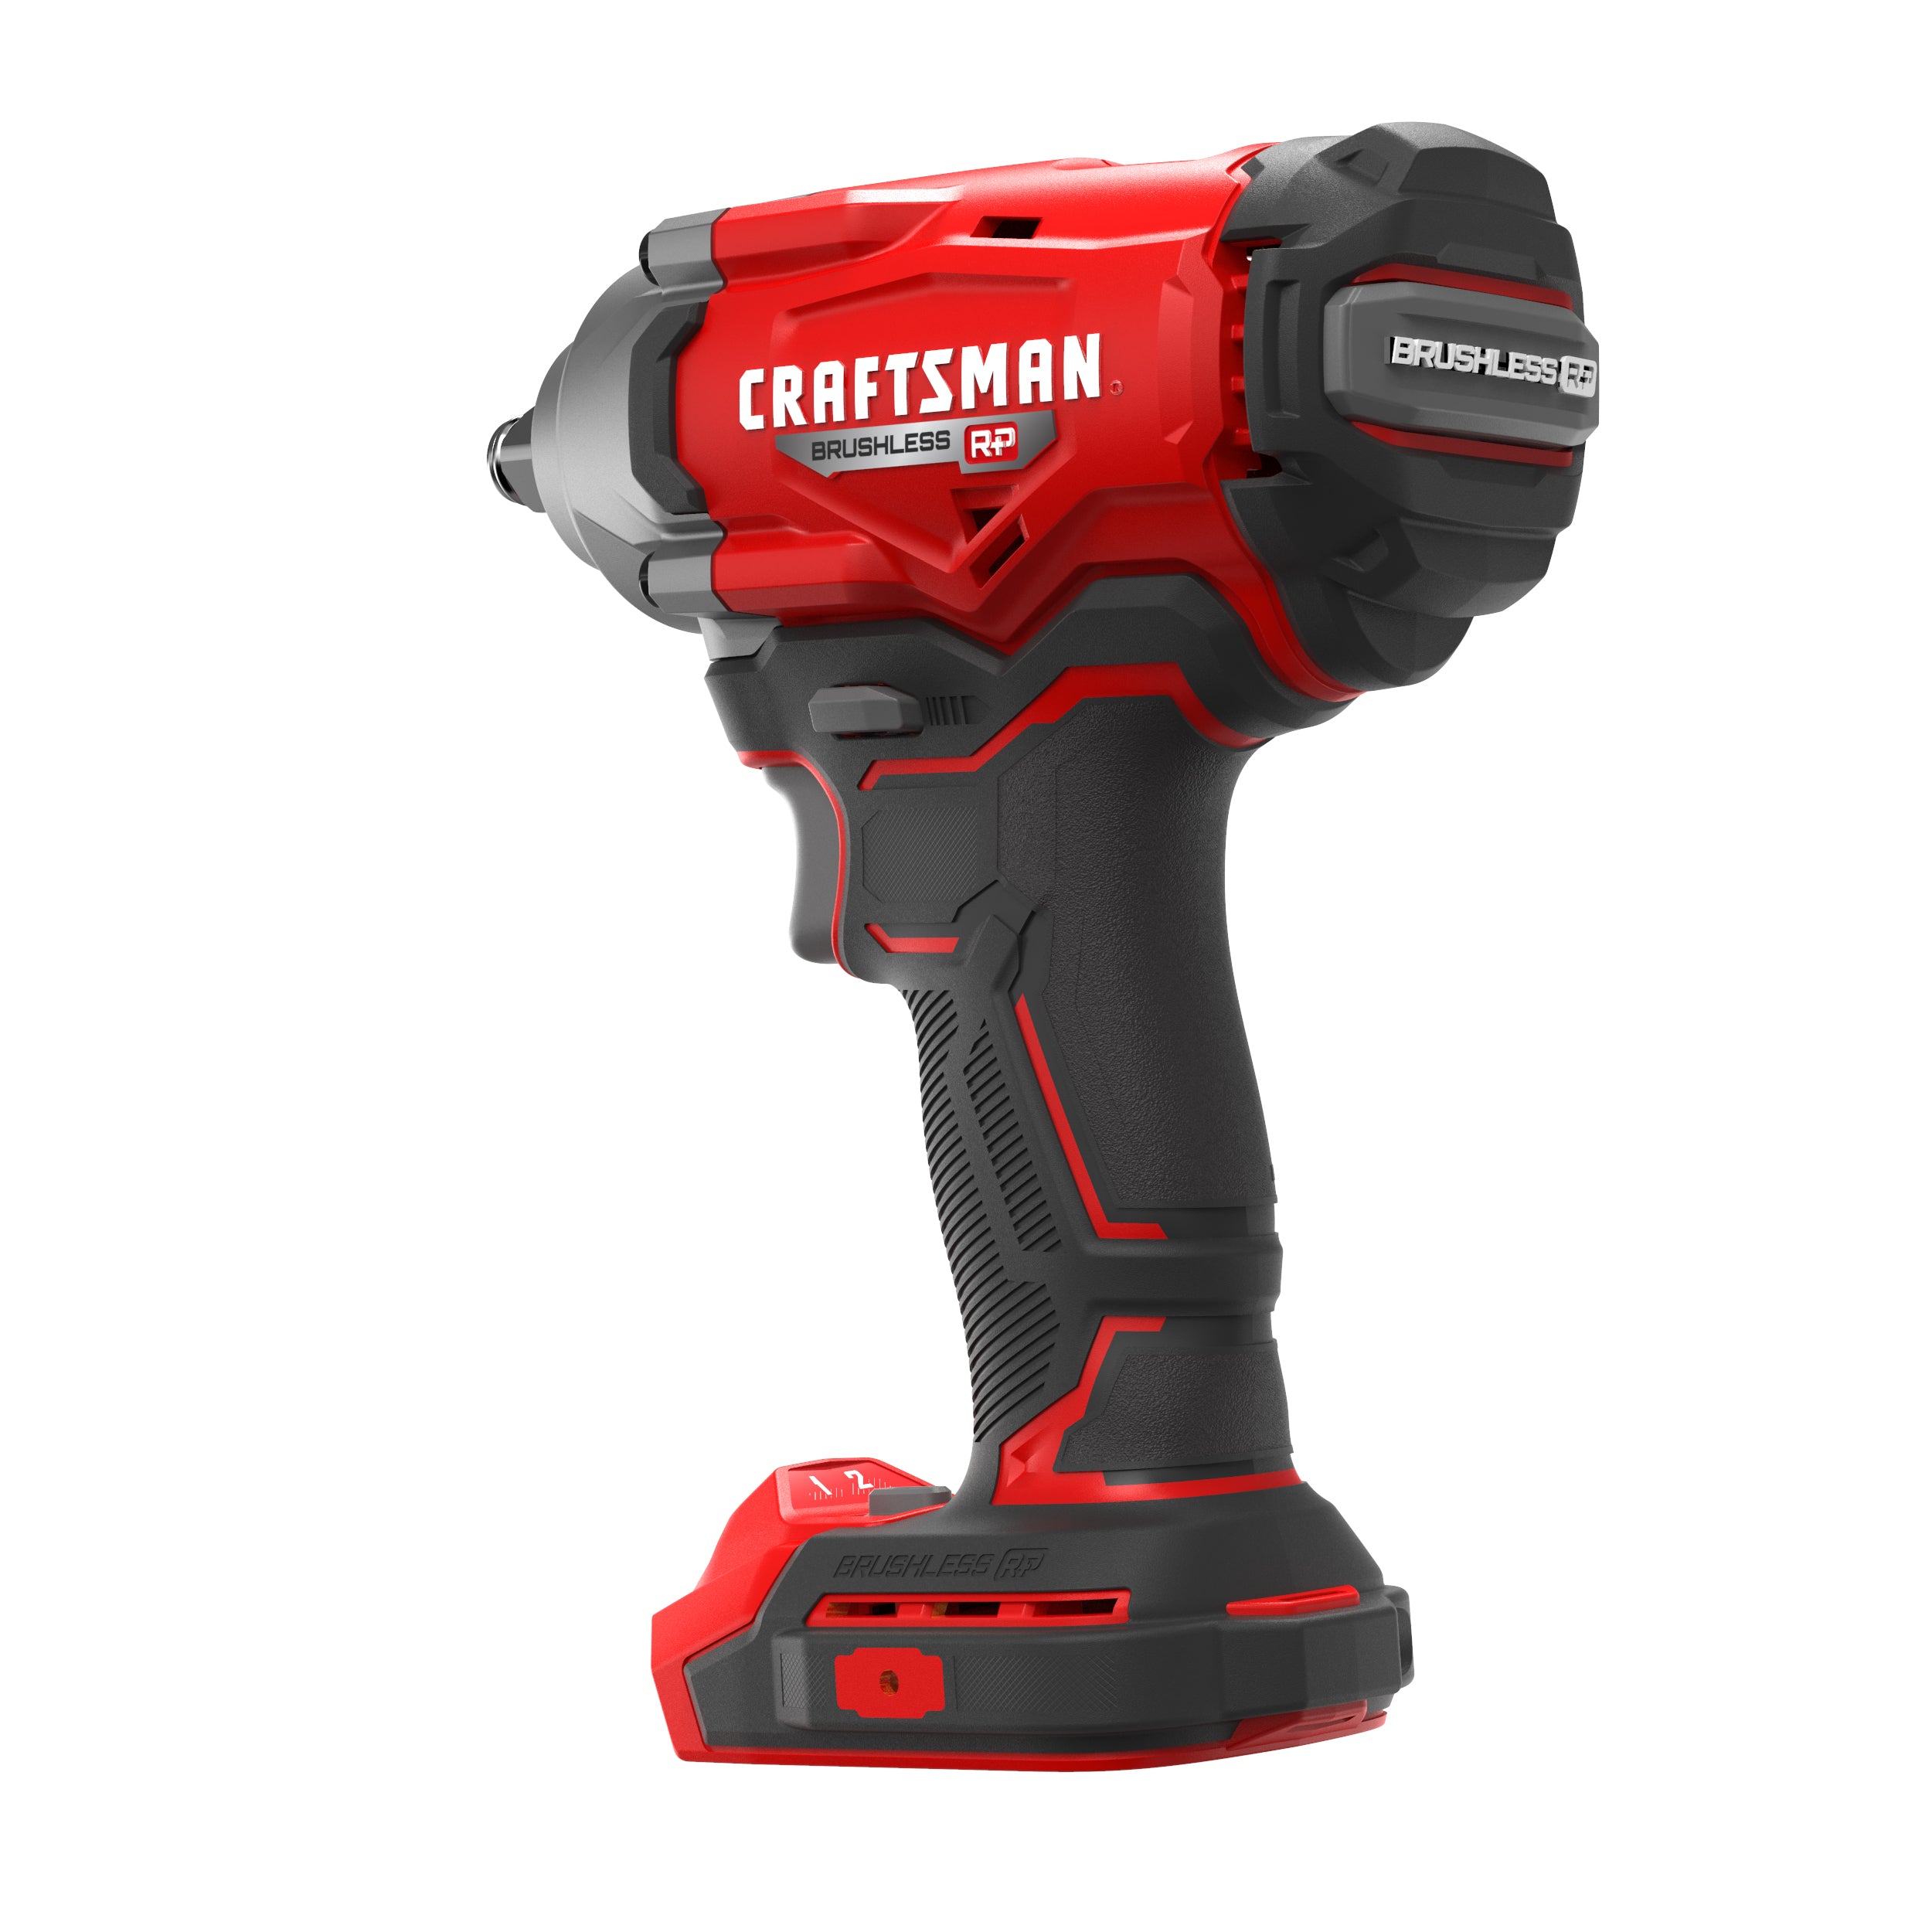 V20* BRUSHLESS RP™ Cordless 1/2 in. Impact Wrench (Tool Only